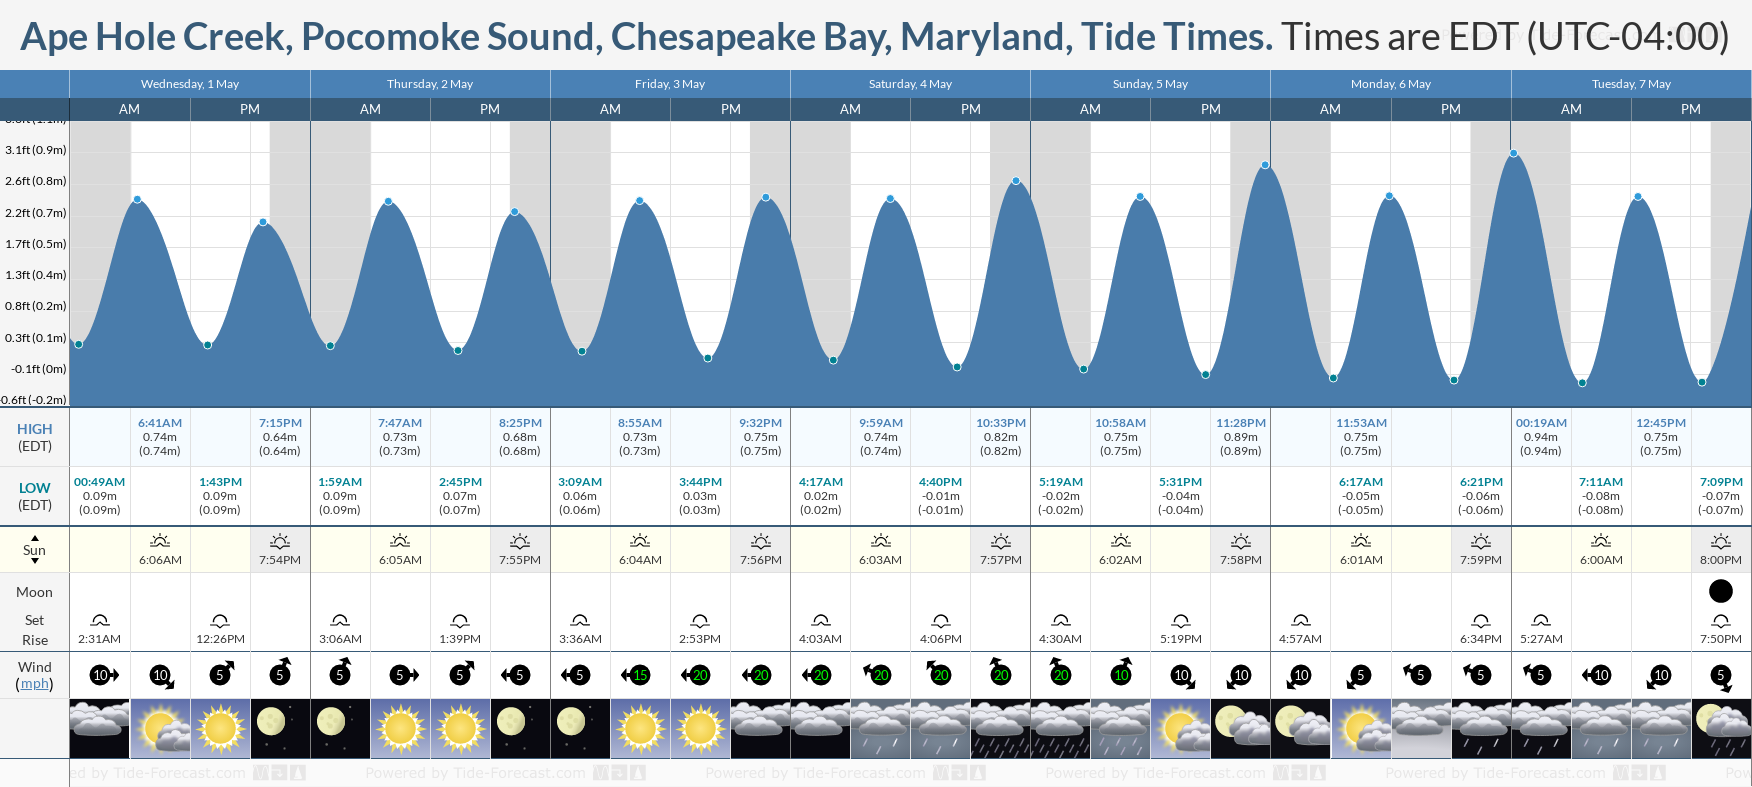 Ape Hole Creek, Pocomoke Sound, Chesapeake Bay, Maryland Tide Chart including high and low tide tide times for the next 7 days